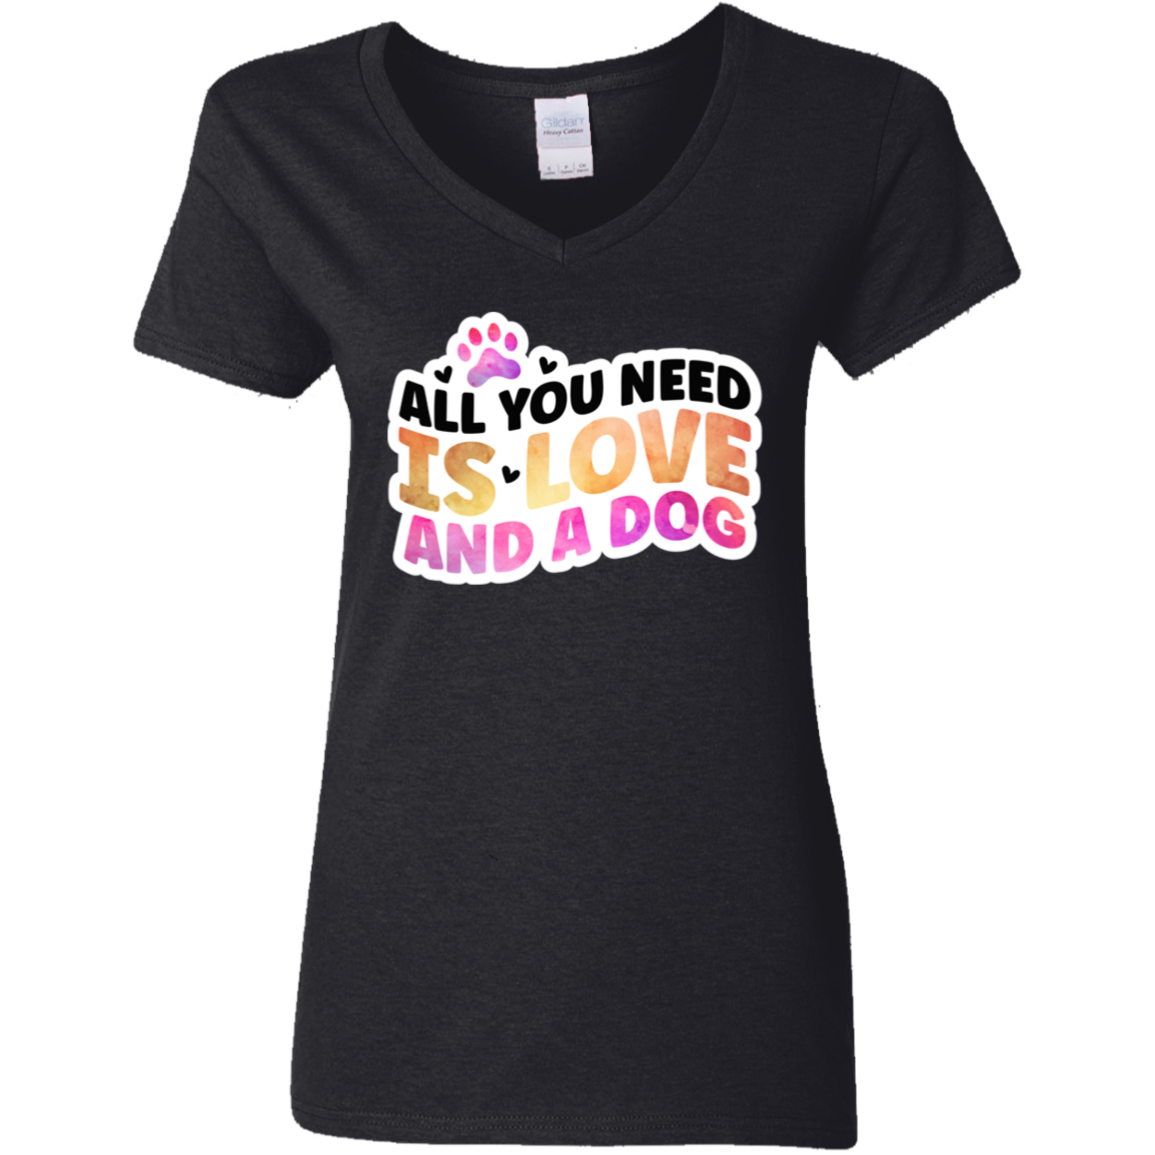 All You Need is Love and a Dog Watercolor Ladies' V-Neck T-Shirt